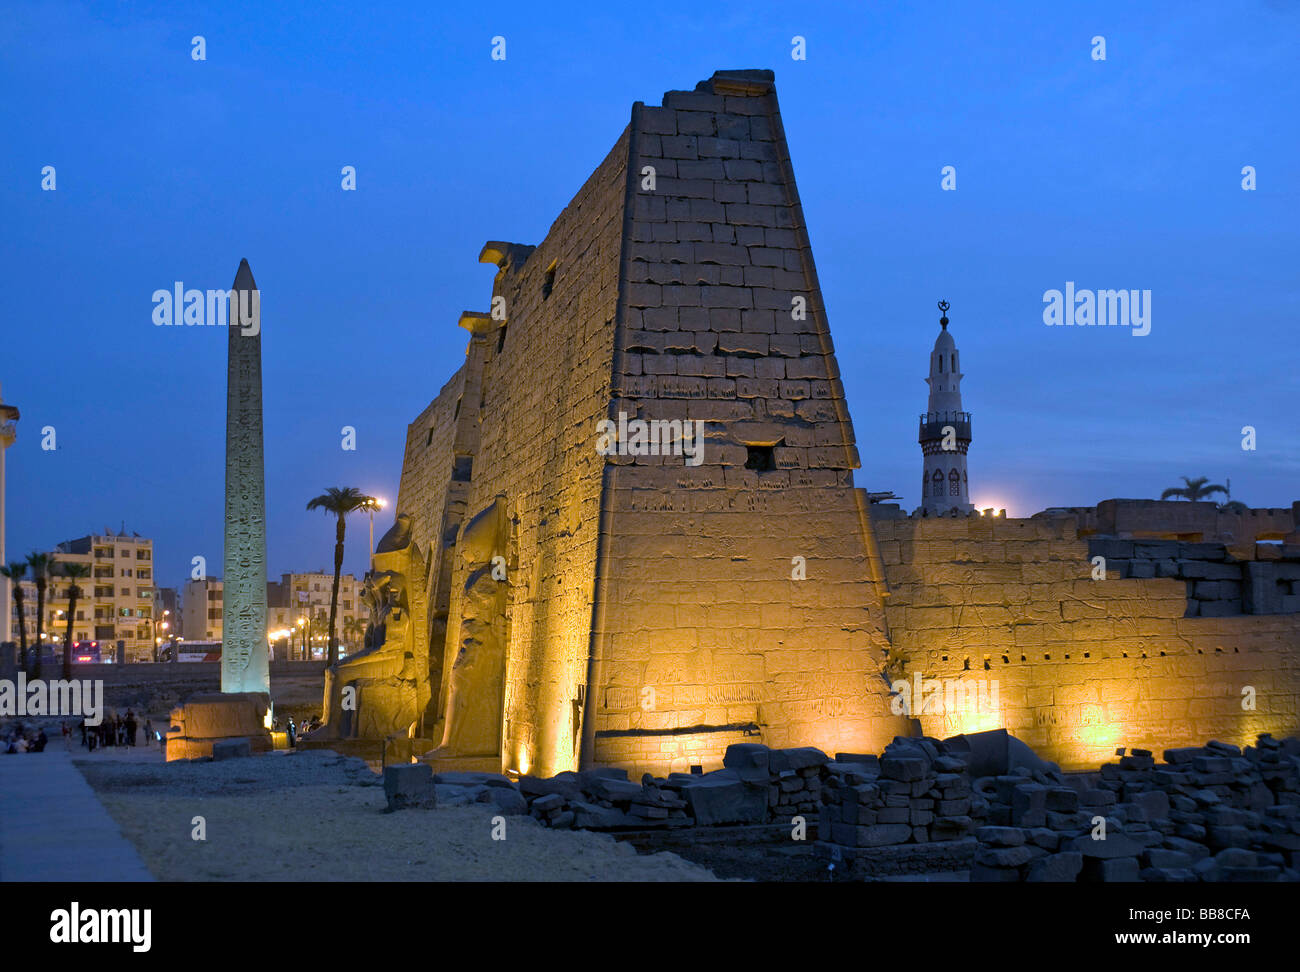 Pylon with figures and obelisk of Ramesses II illuminated in the evening, in front of a minaret, Luxor Temple, Luxor, Egypt, Af Stock Photo